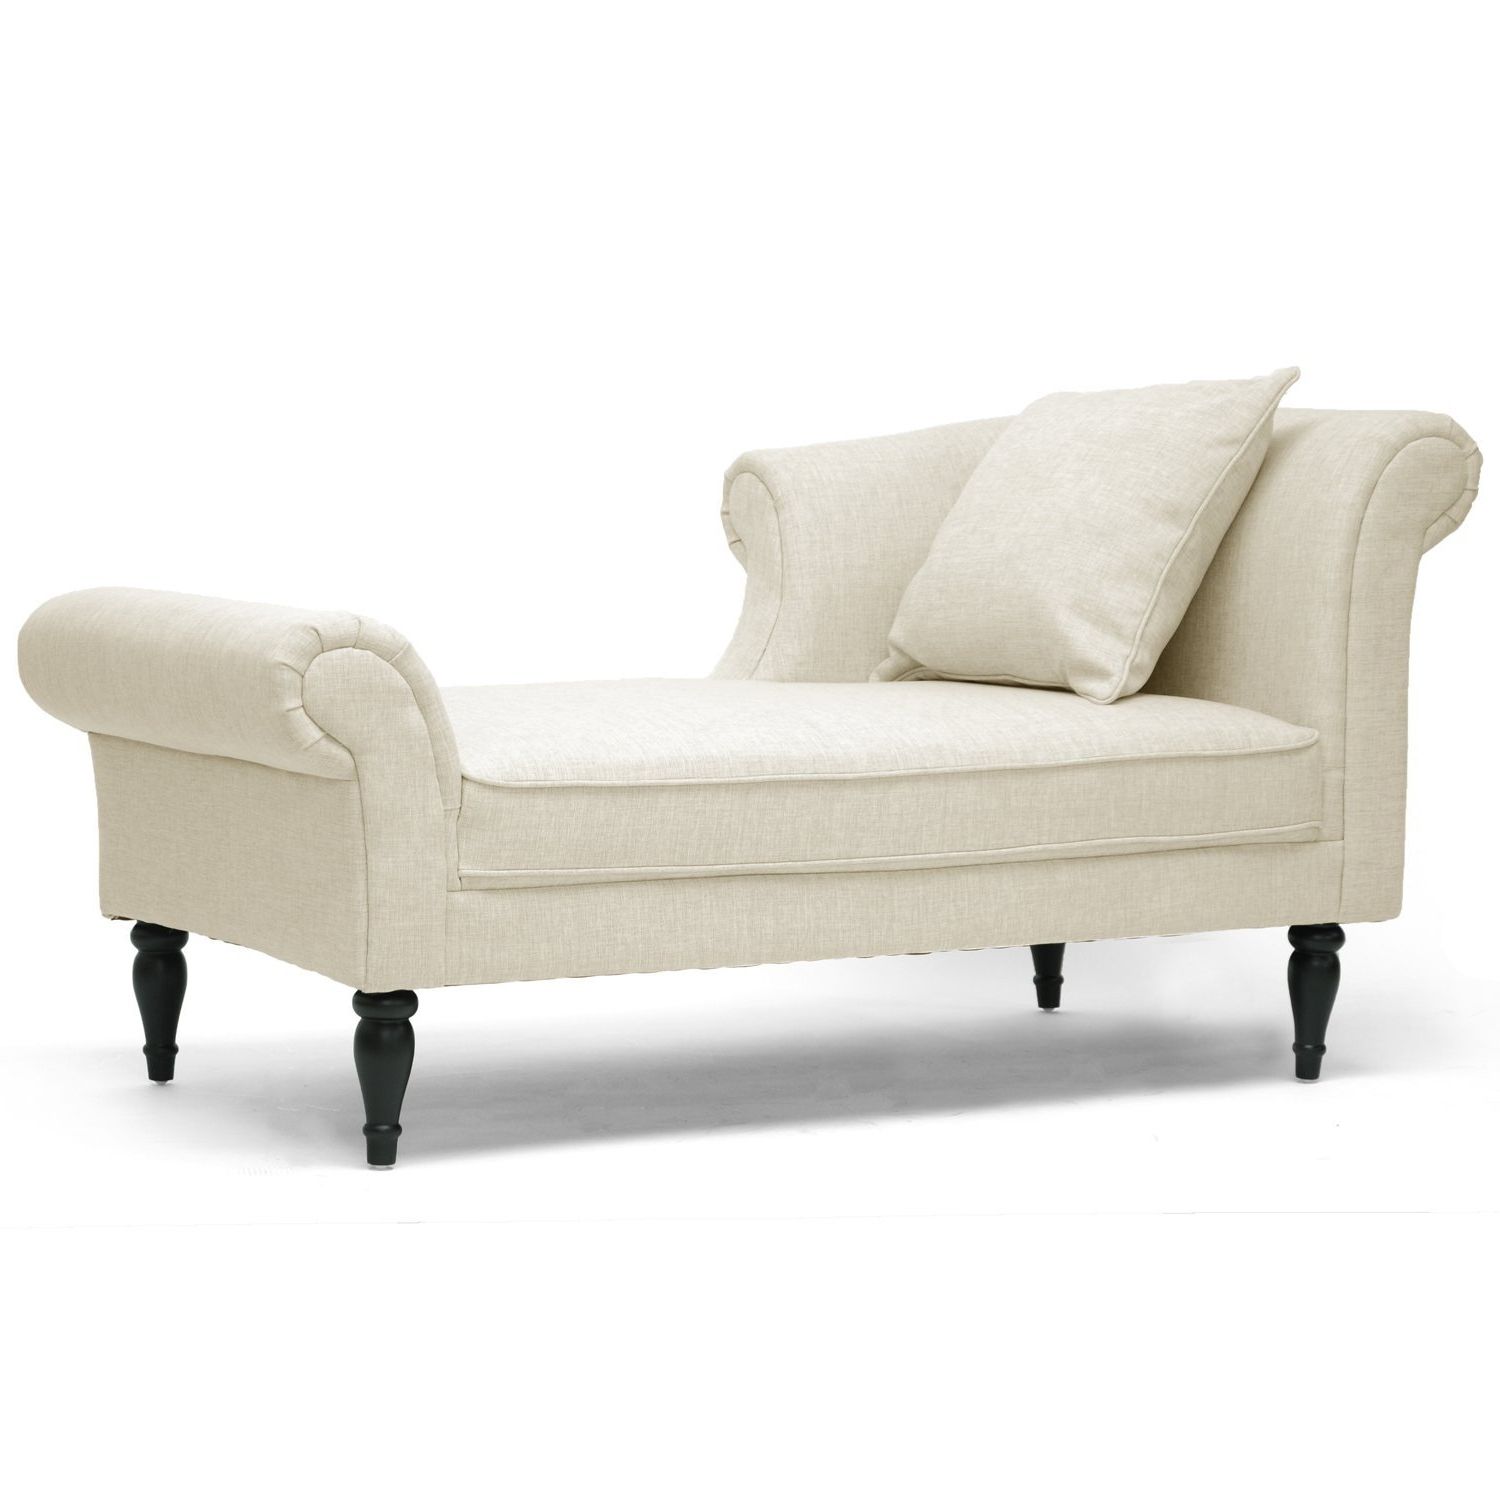 Chaise Lounge Sofa Beds In Most Recent Fresh Chaise Lounge Sofa Bed # (View 5 of 15)